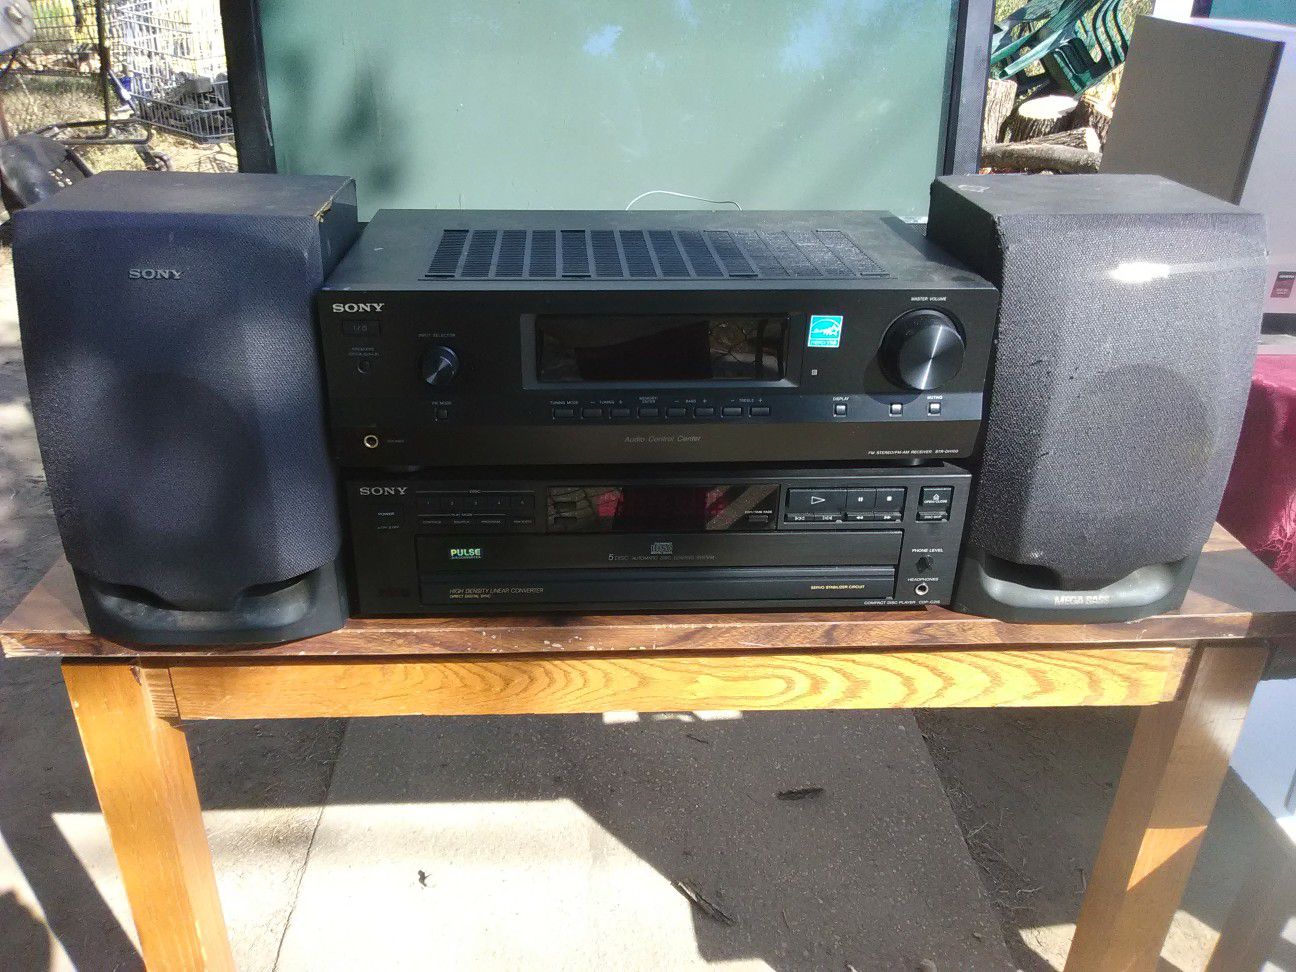 300 Watts Sony receiver with remote control and 5 disc CD player plus bookshelf speakers